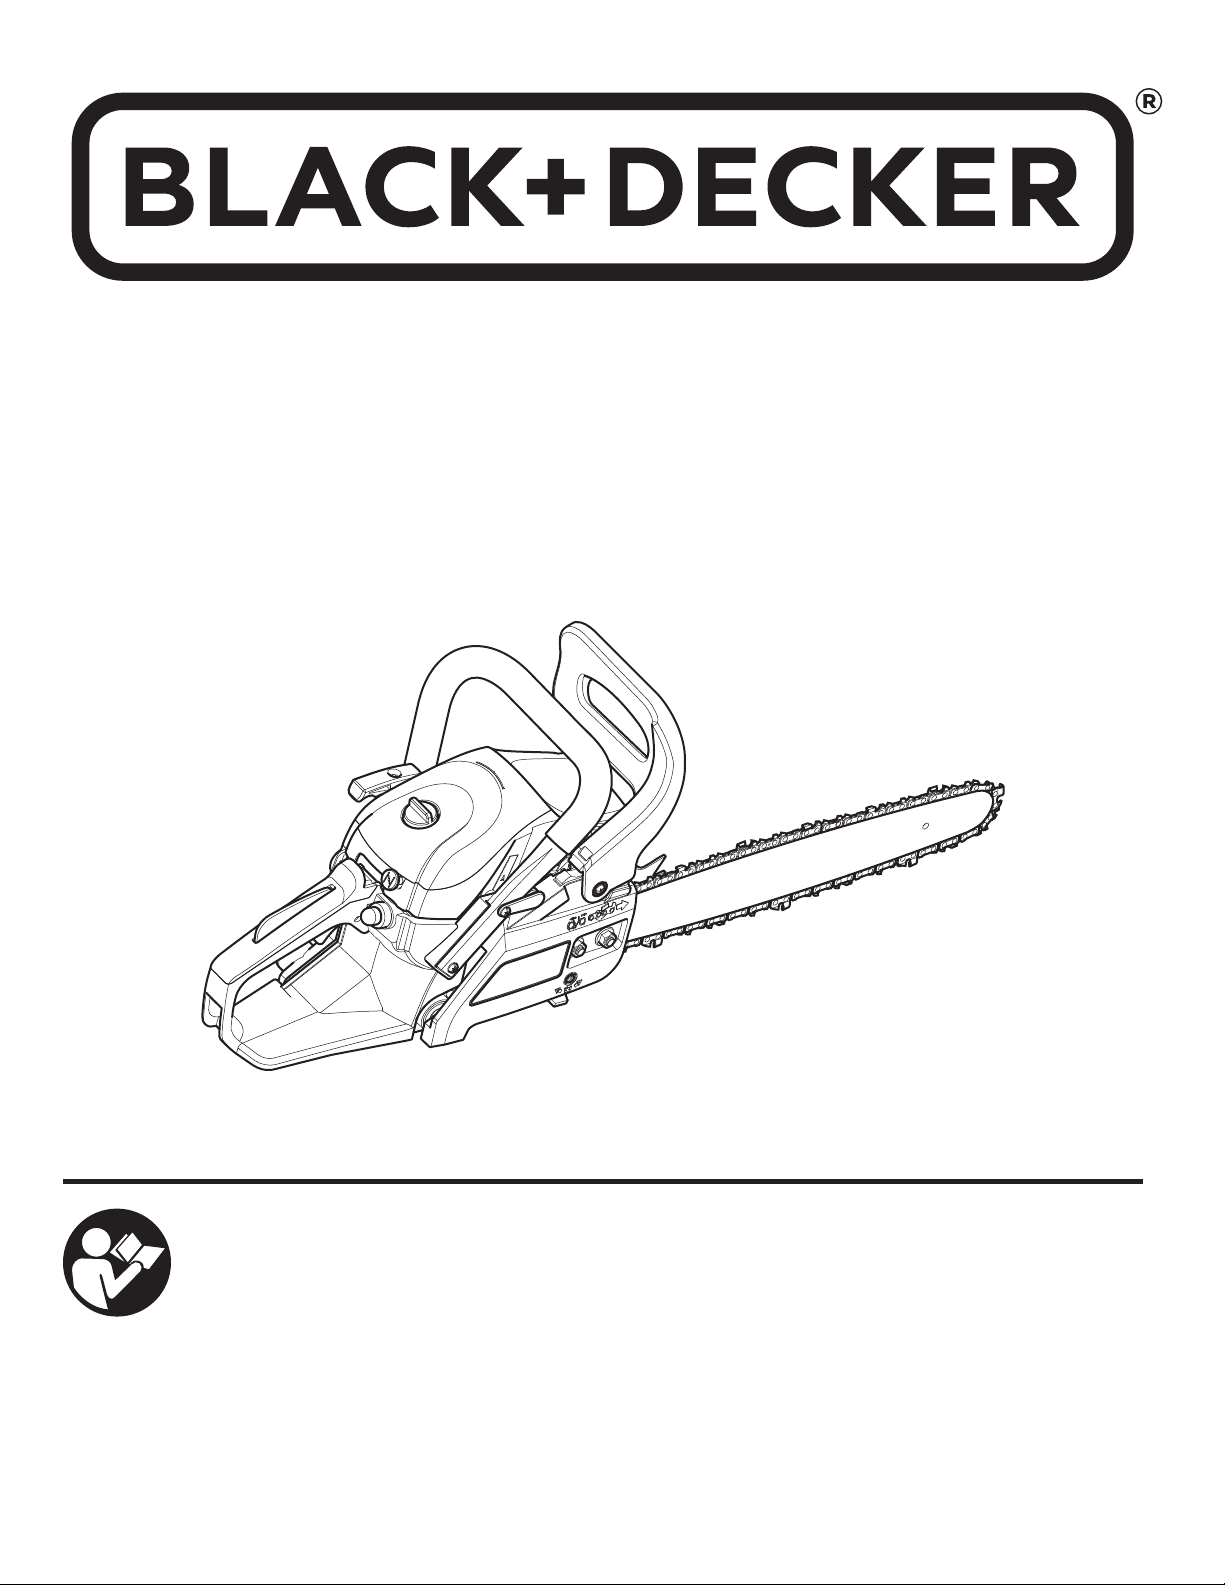 User manual Black & Decker RC516 (English - 60 pages)